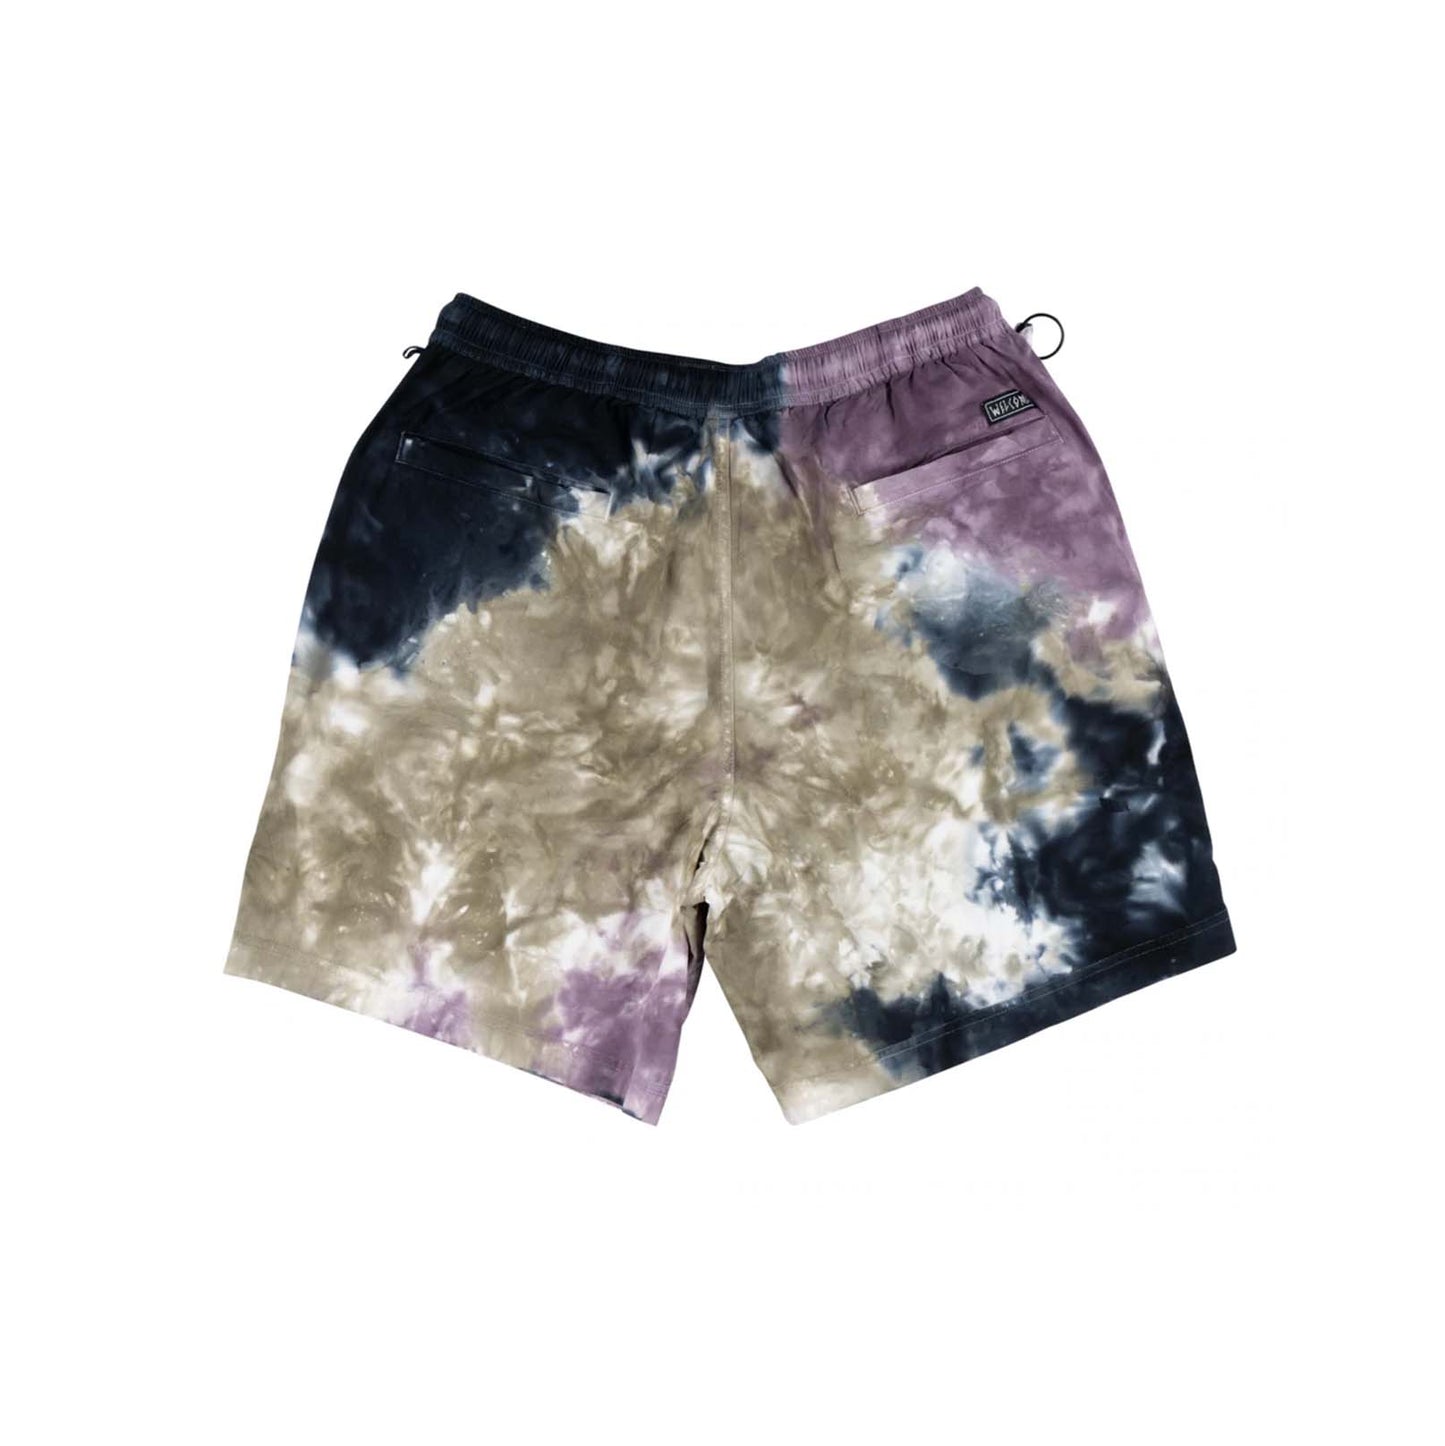 WELCOME - SOFT CORE TIE-DYE SHORTS - EGGPLANT